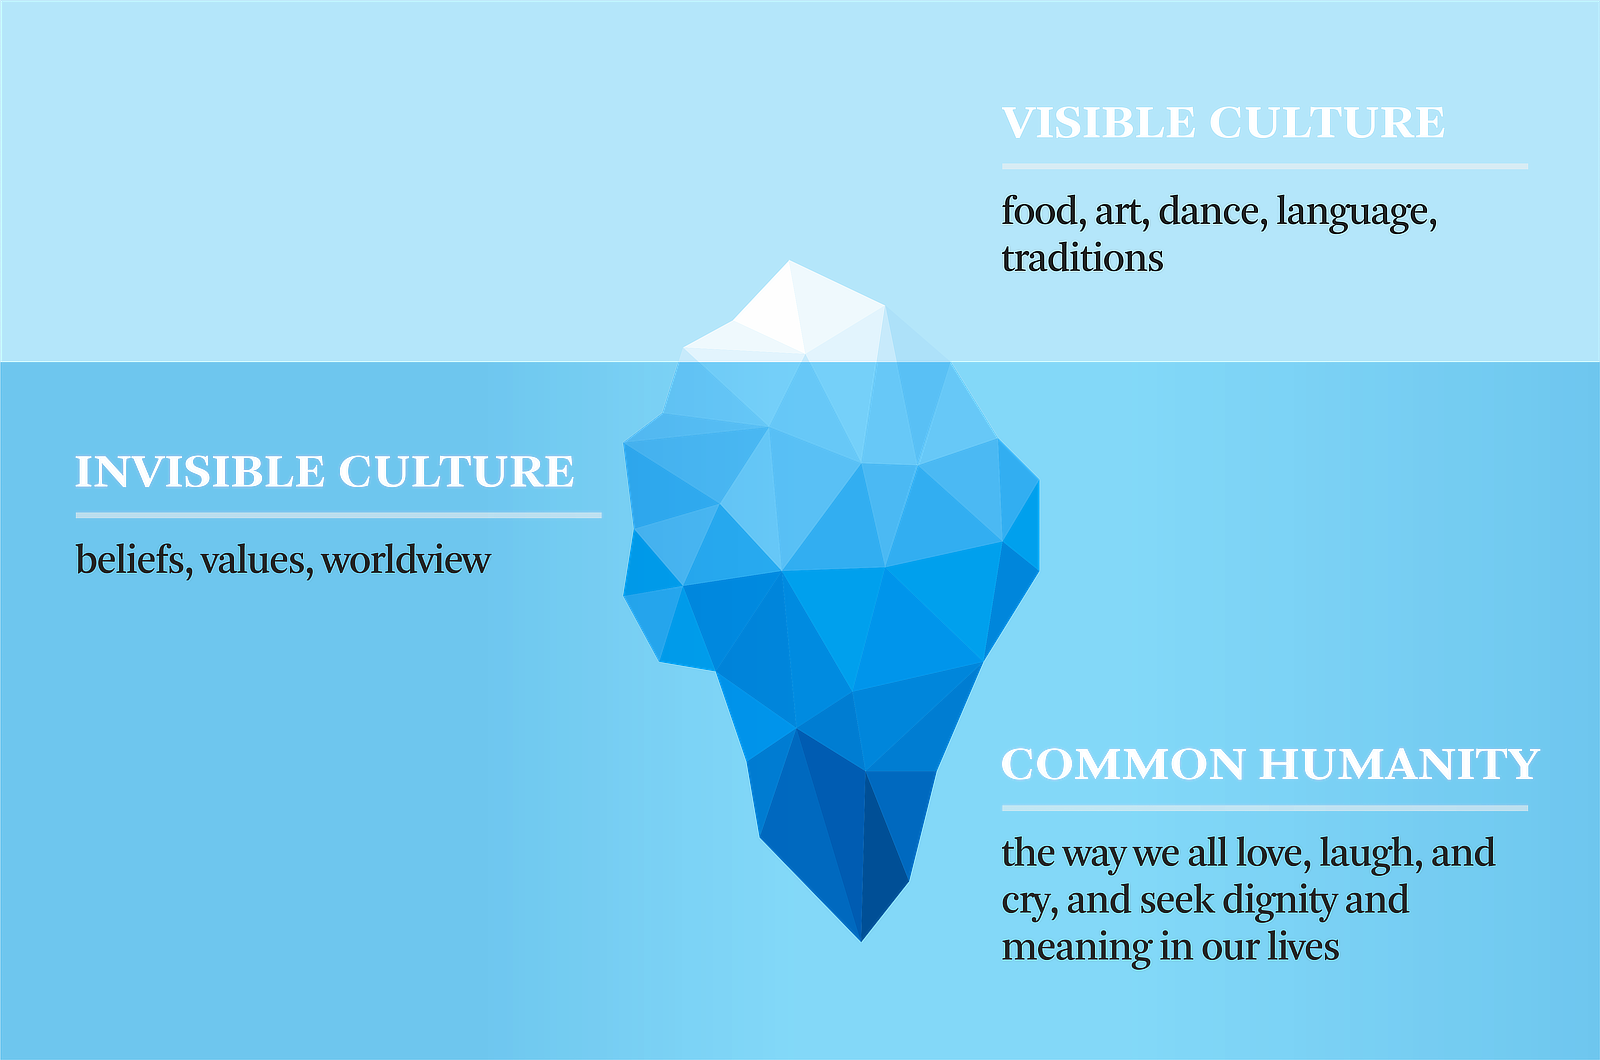 Cultral Iceberg Model that incorporates visible culture, invisible culture, and common humanity